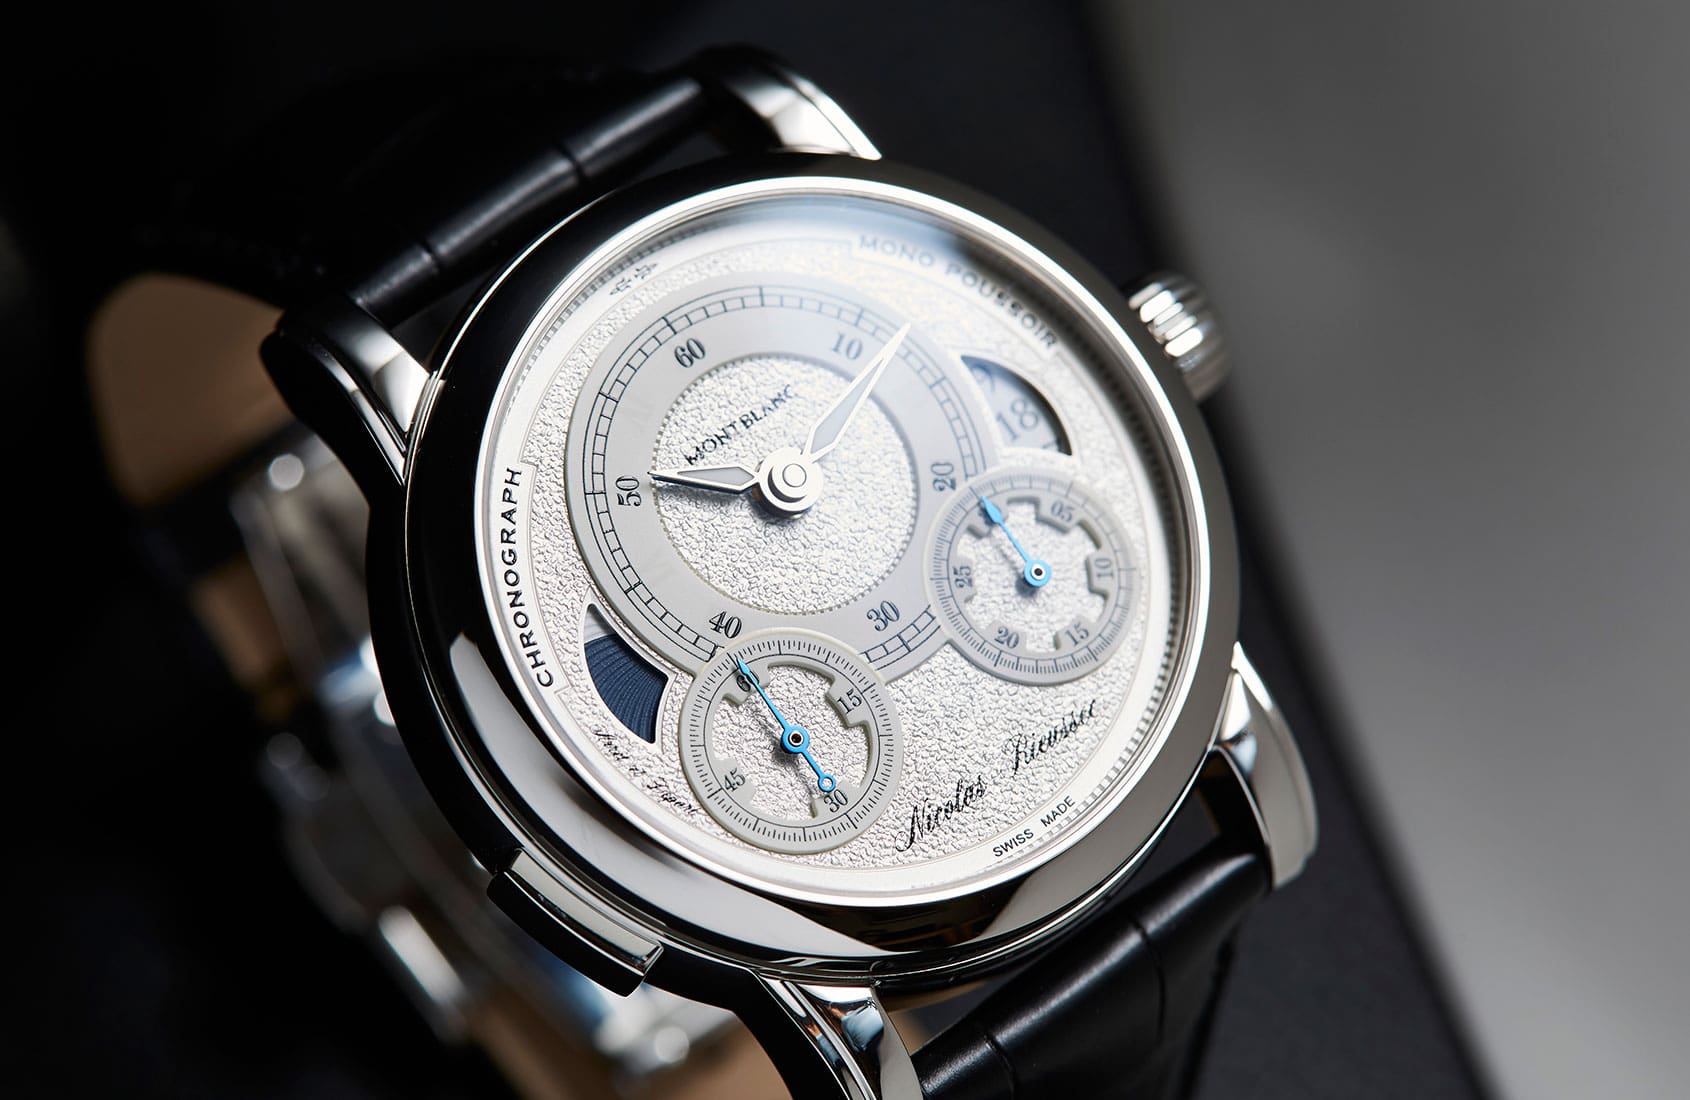 EDITOR’S PICK: Not your average chronograph – the Montblanc Homage to Nicolas Rieussec II Limited Edition